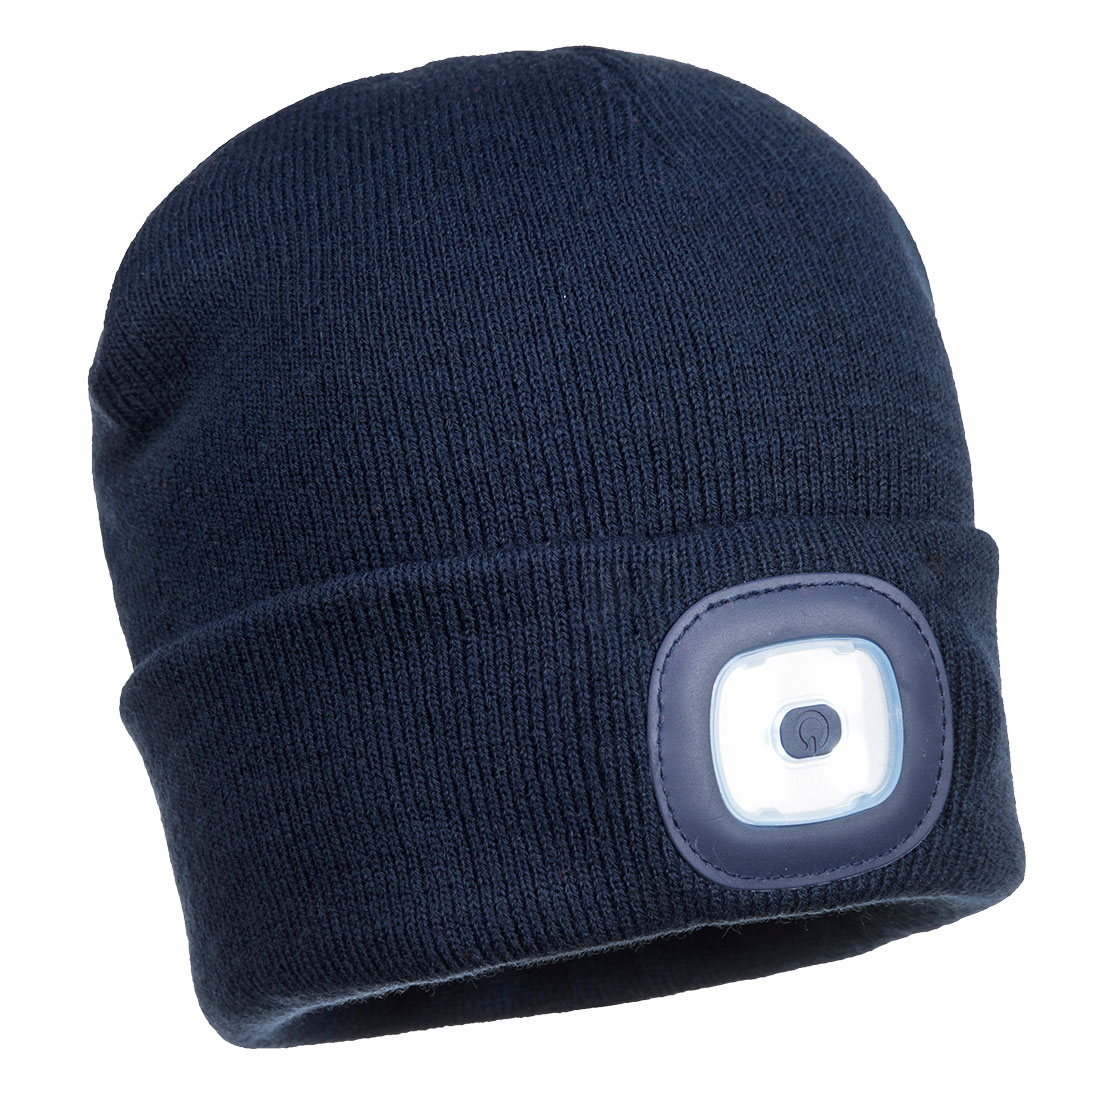 B028 Portwest® USB Rechargeable Twin LED Beanie Head Light - Navy Blue